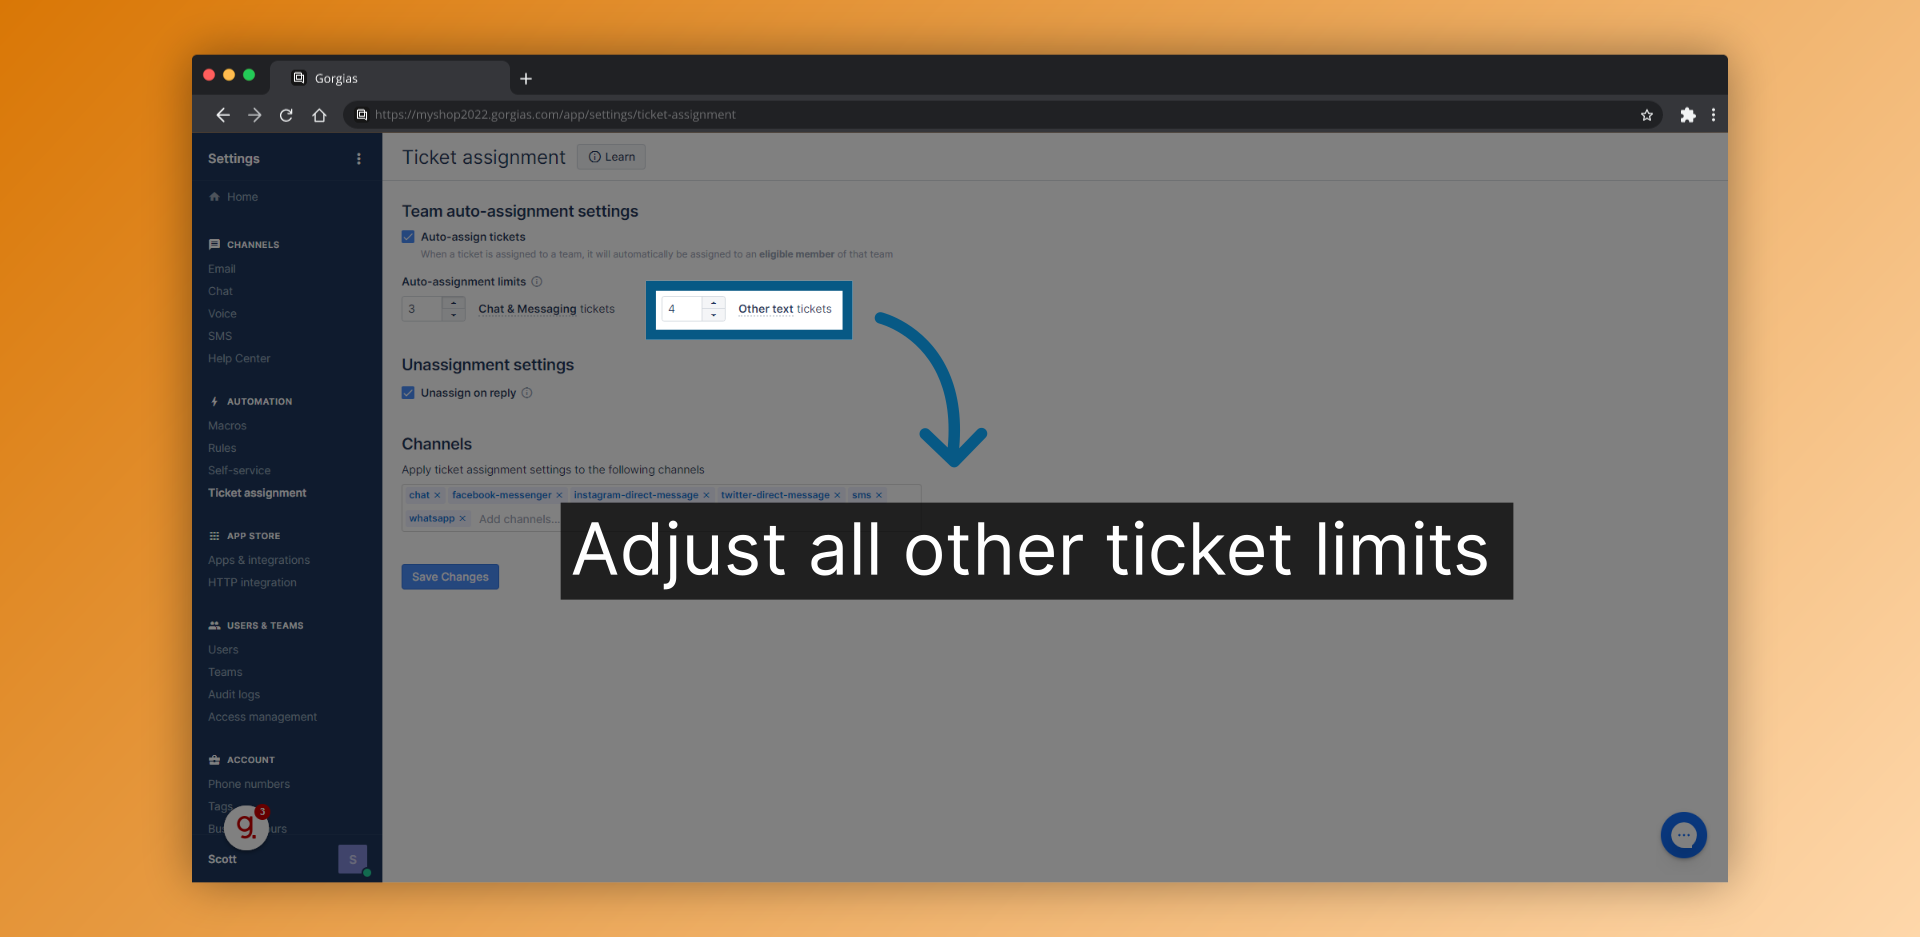 Adjust all other ticket limits